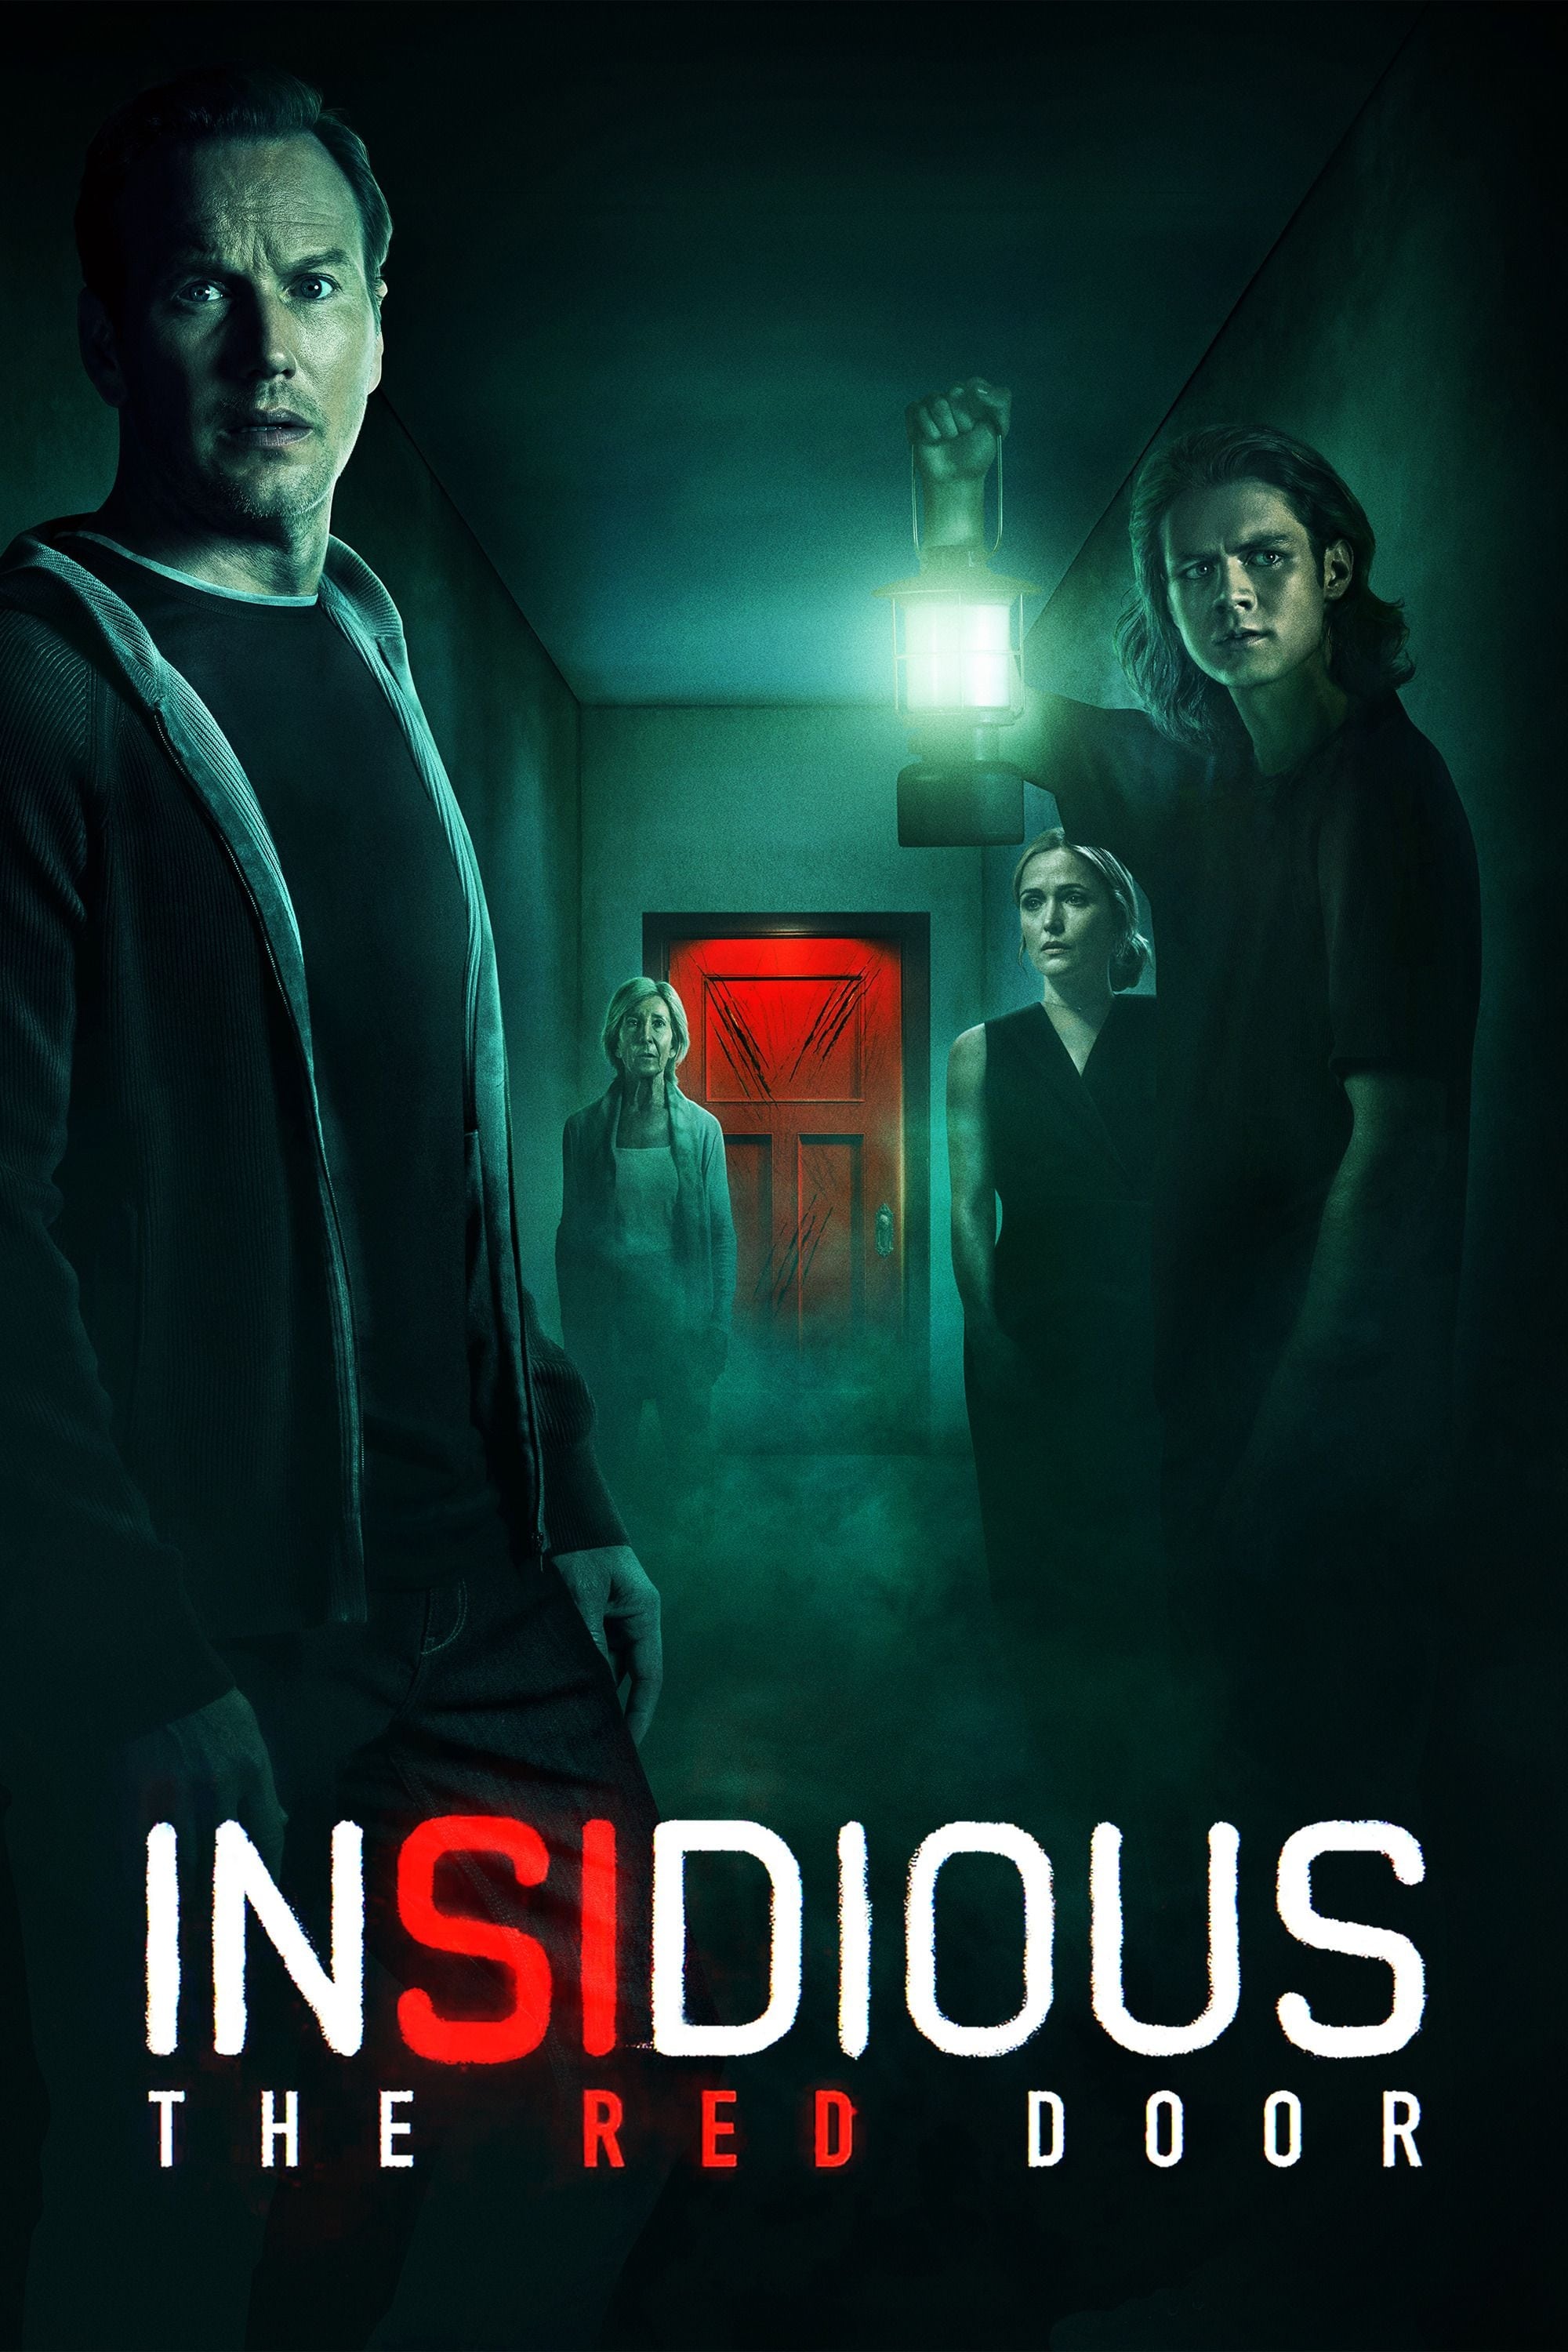 Insidious The Red Door Full Movie Watch Online